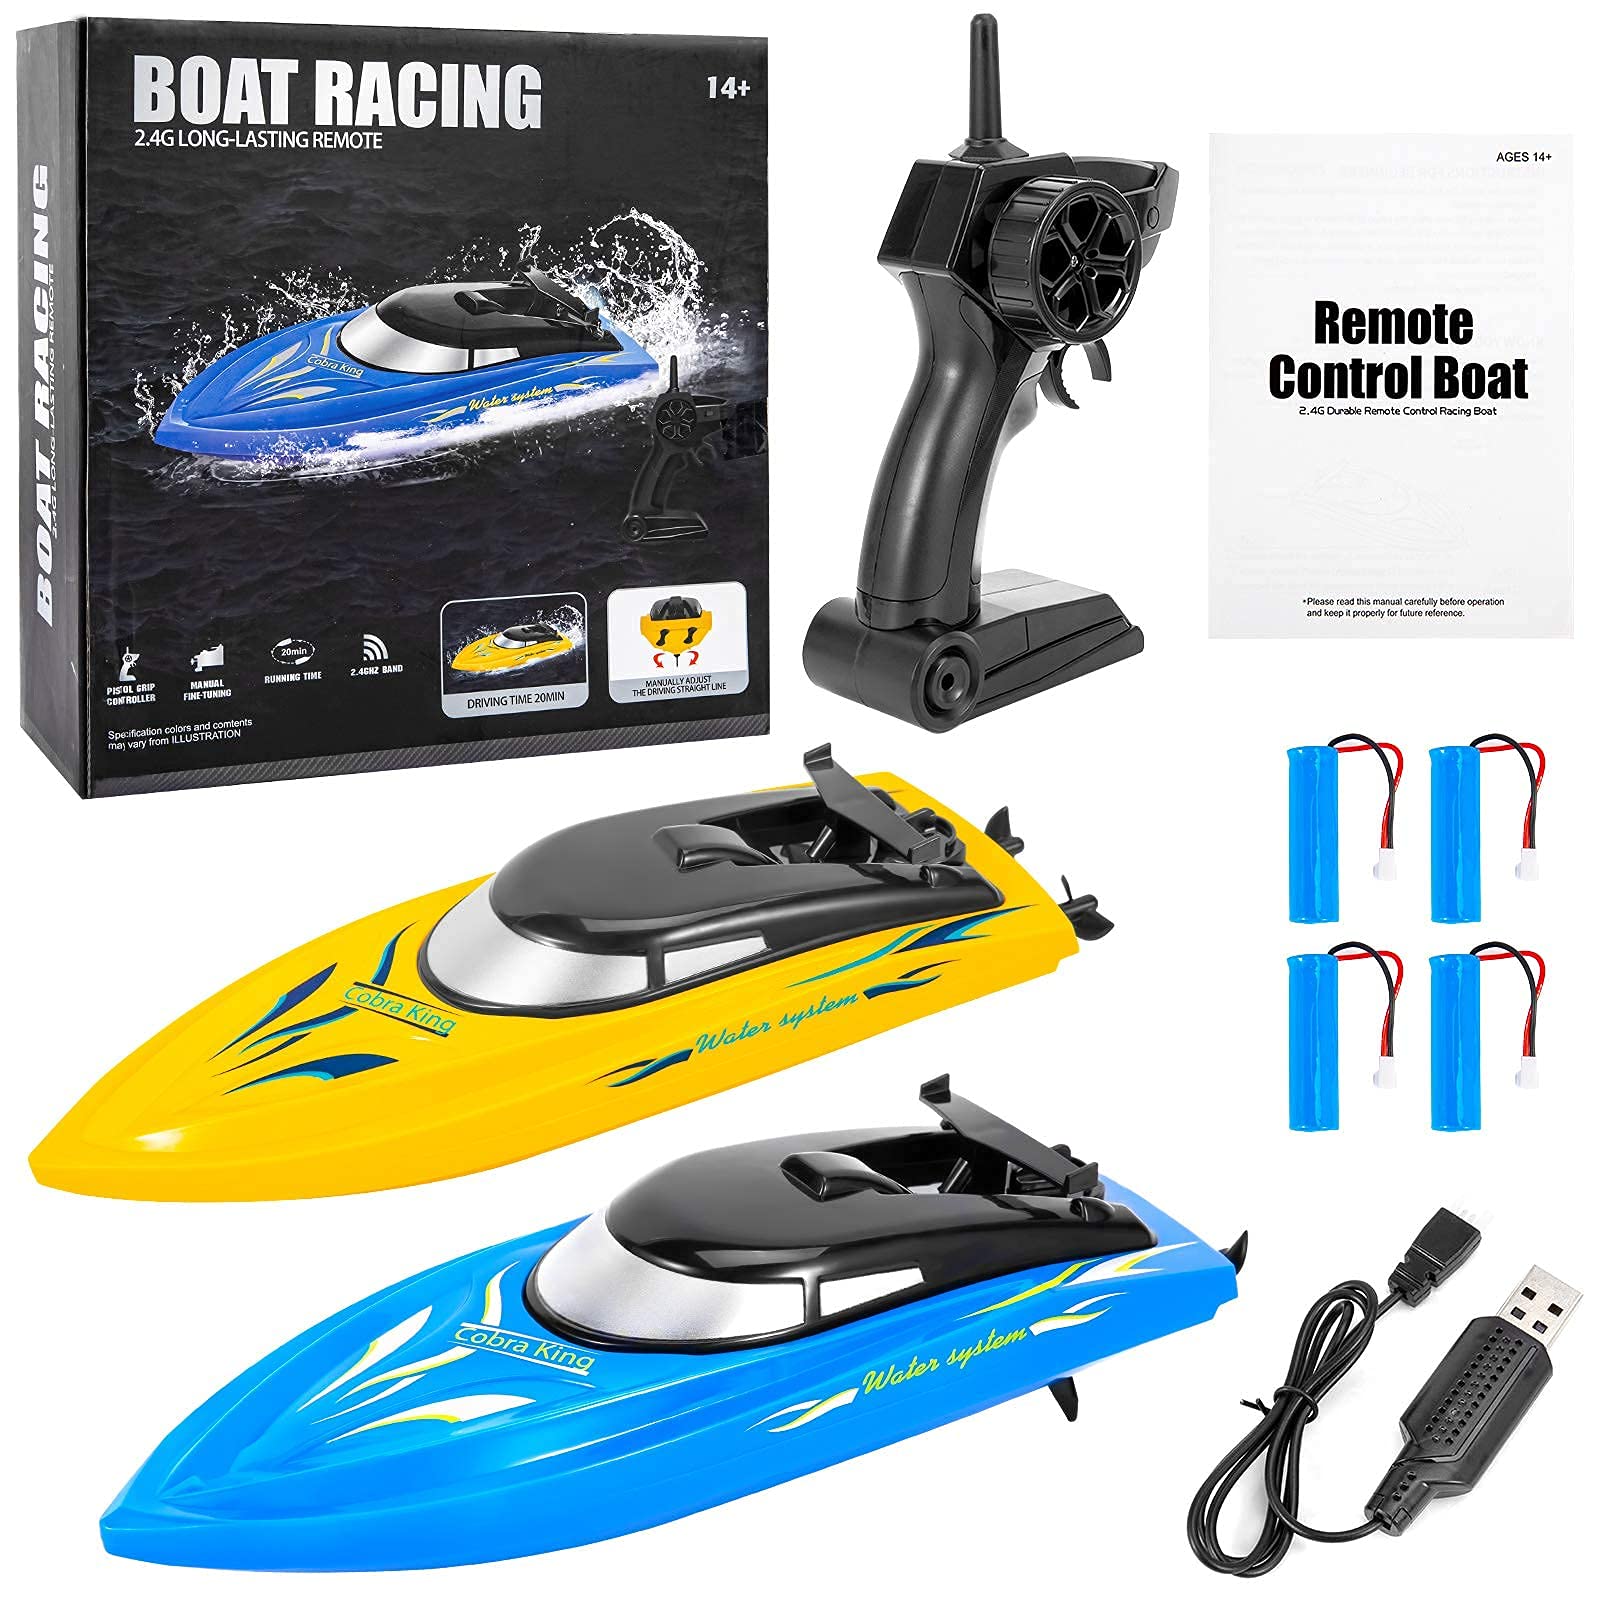 THINKMAX 2PACK 10km/H 2.4G High Speed Remote Control Boats (Blue+Yellow)